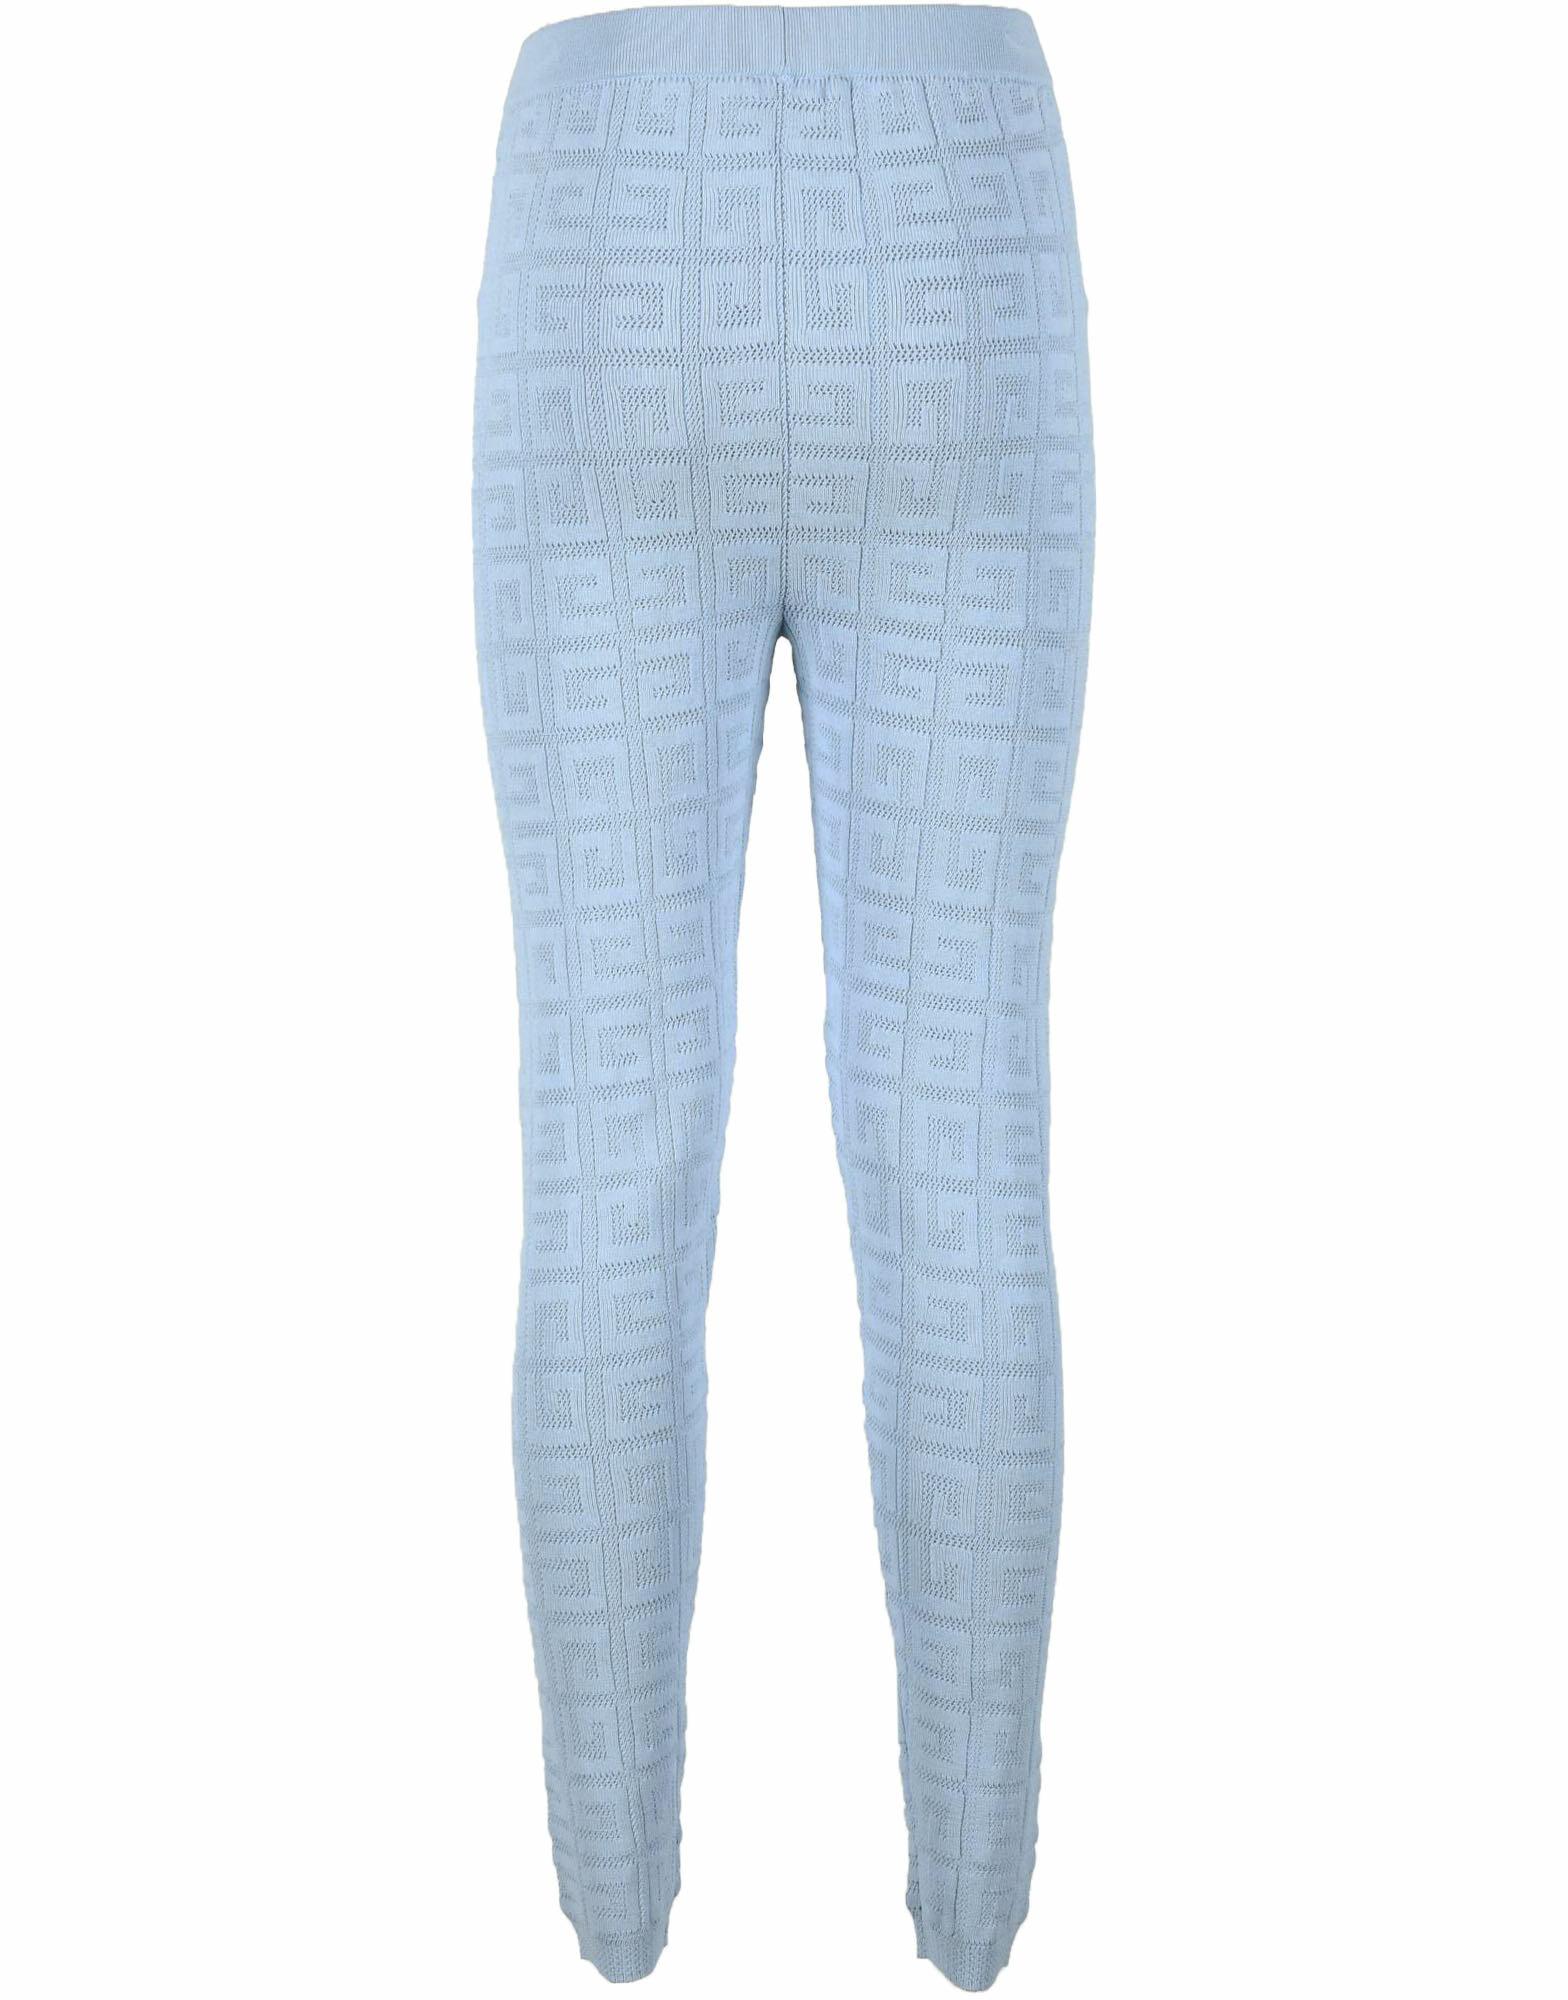 Givenchy Women's Sky Blue Leggings M at FORZIERI